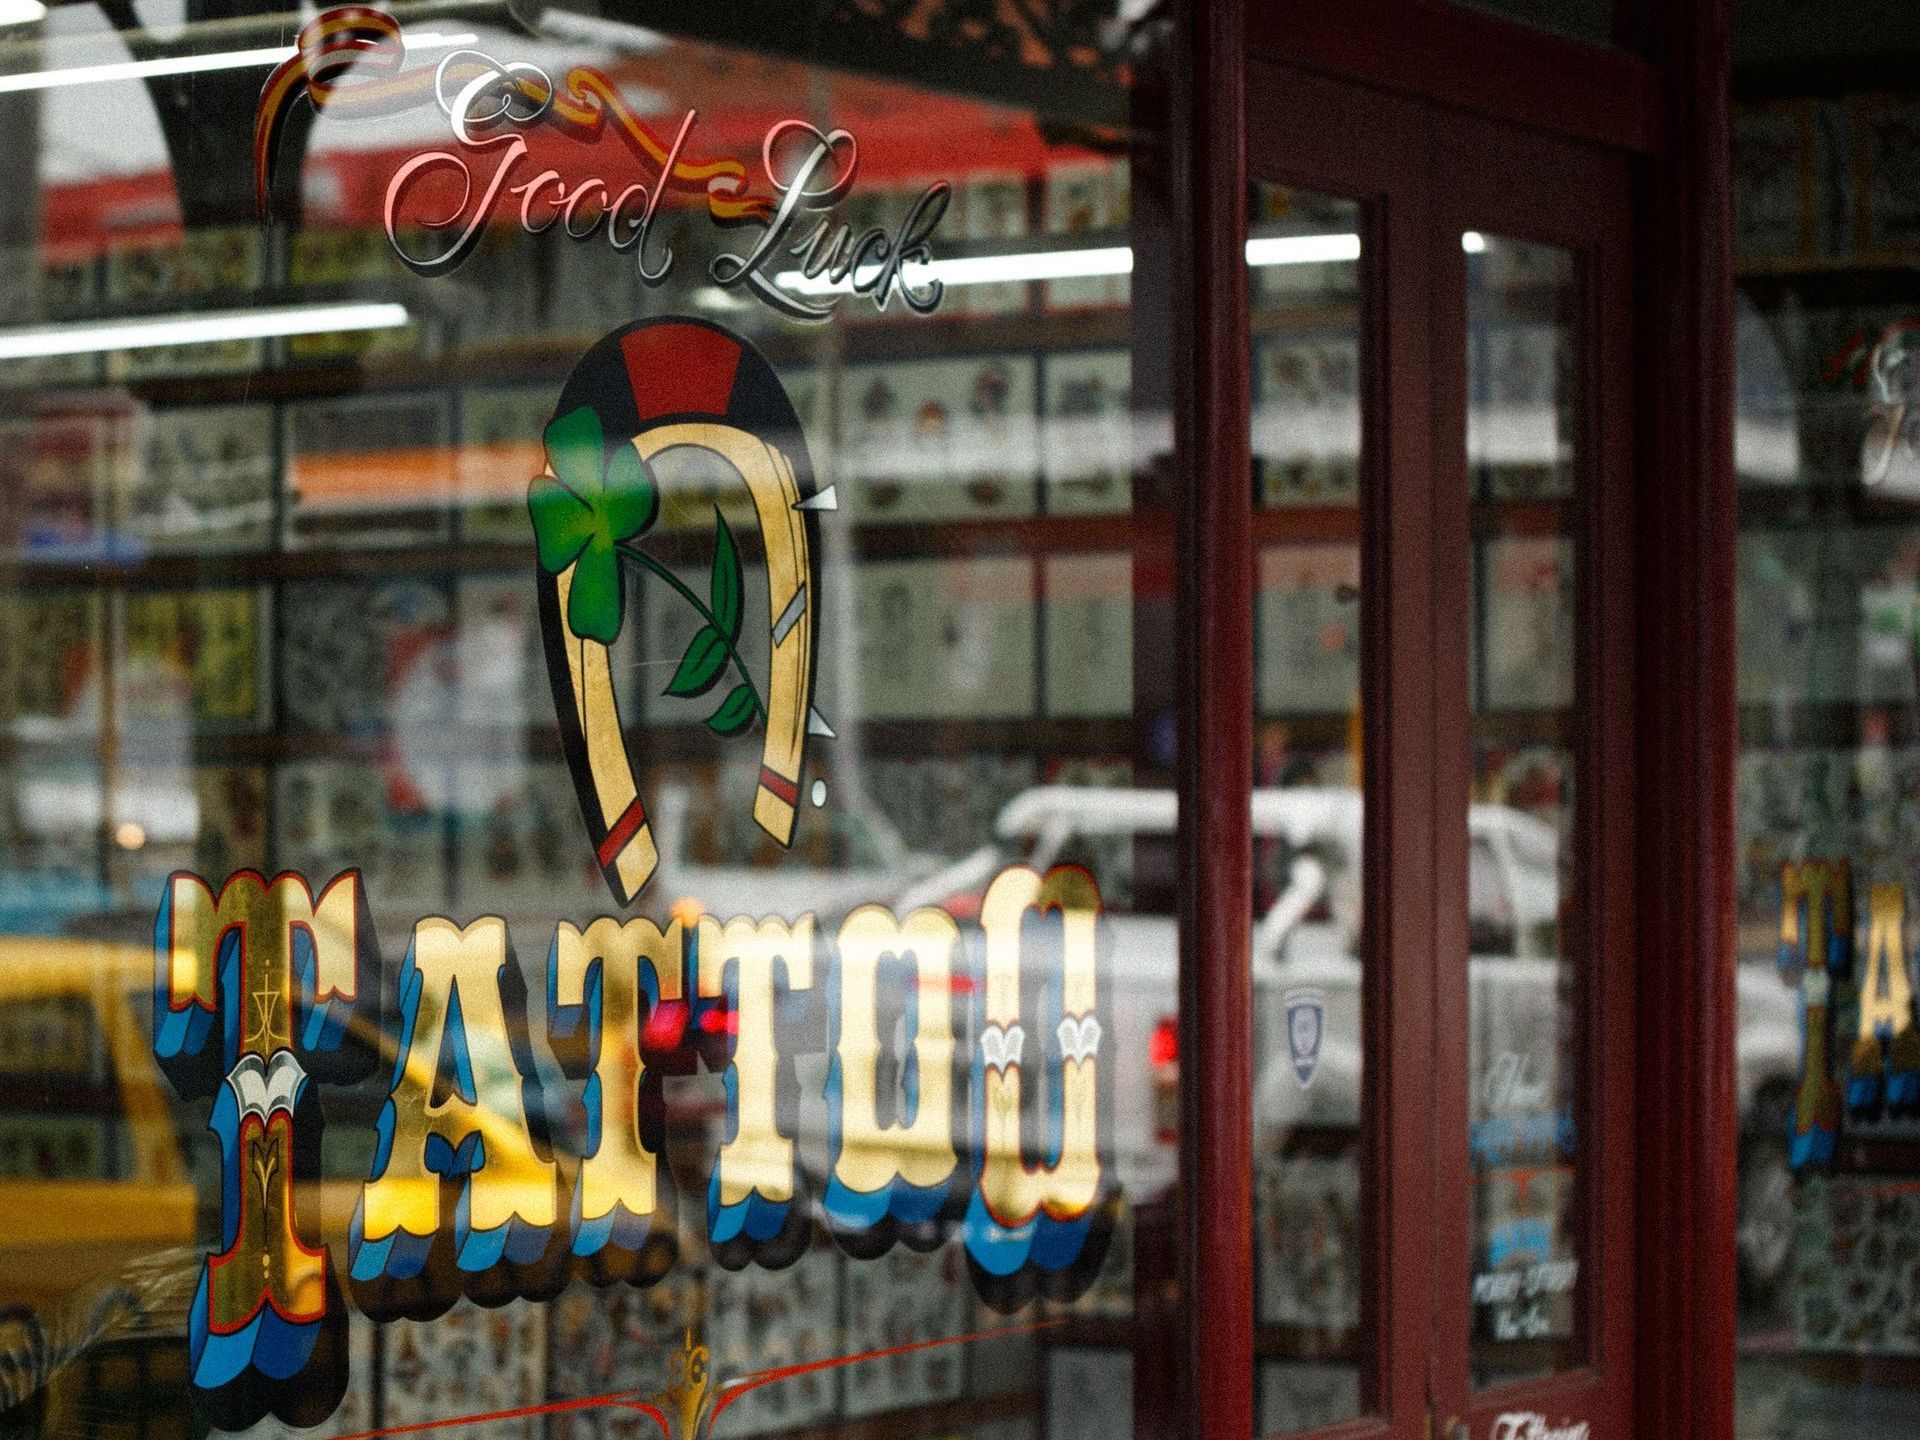 a tattoo shop has a sign that says good luck tattoo